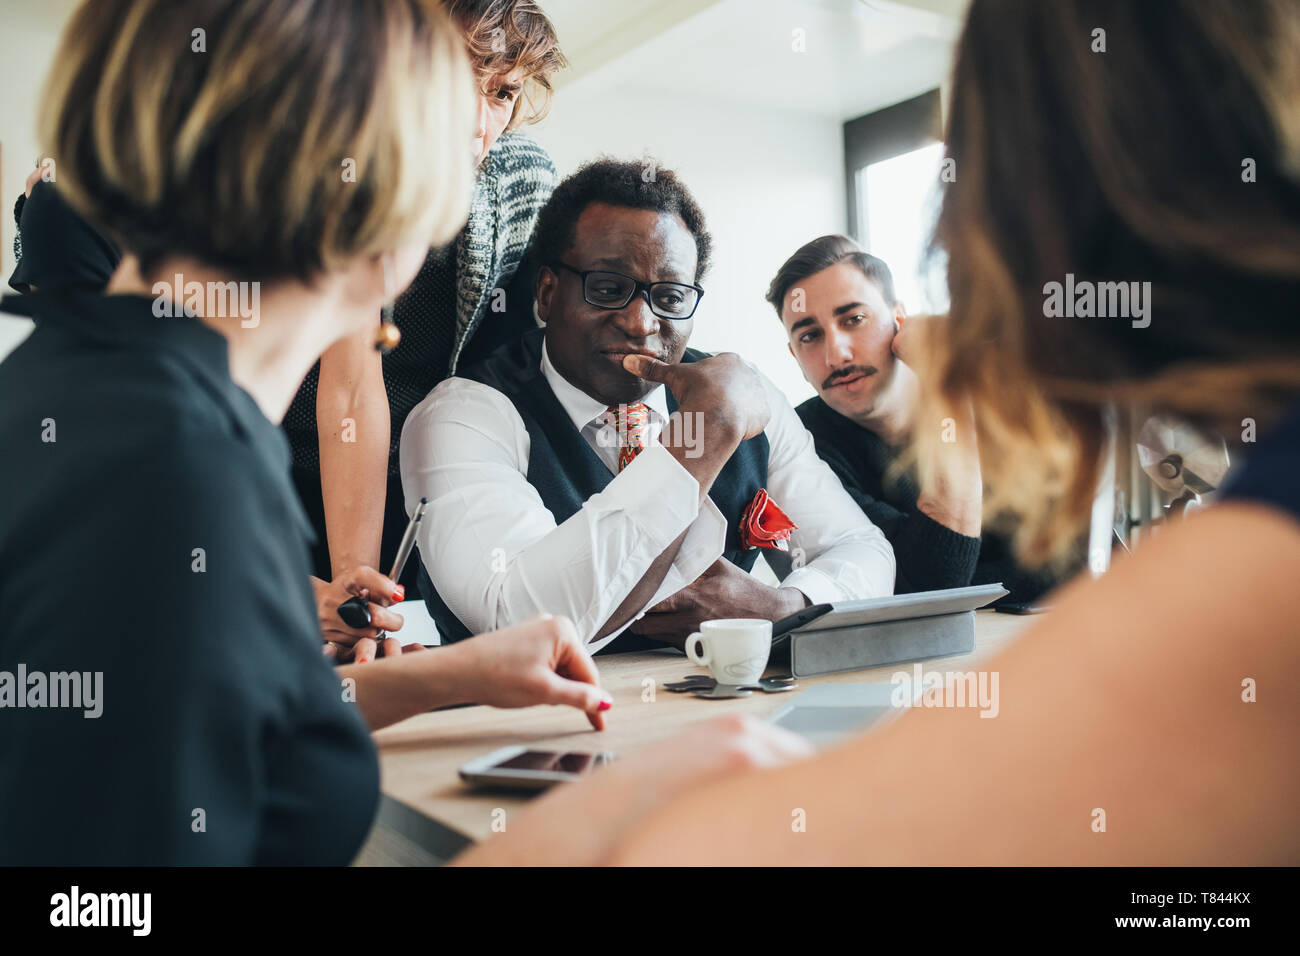 Businessmen and businesswomen having discussion in loft office Stock Photo